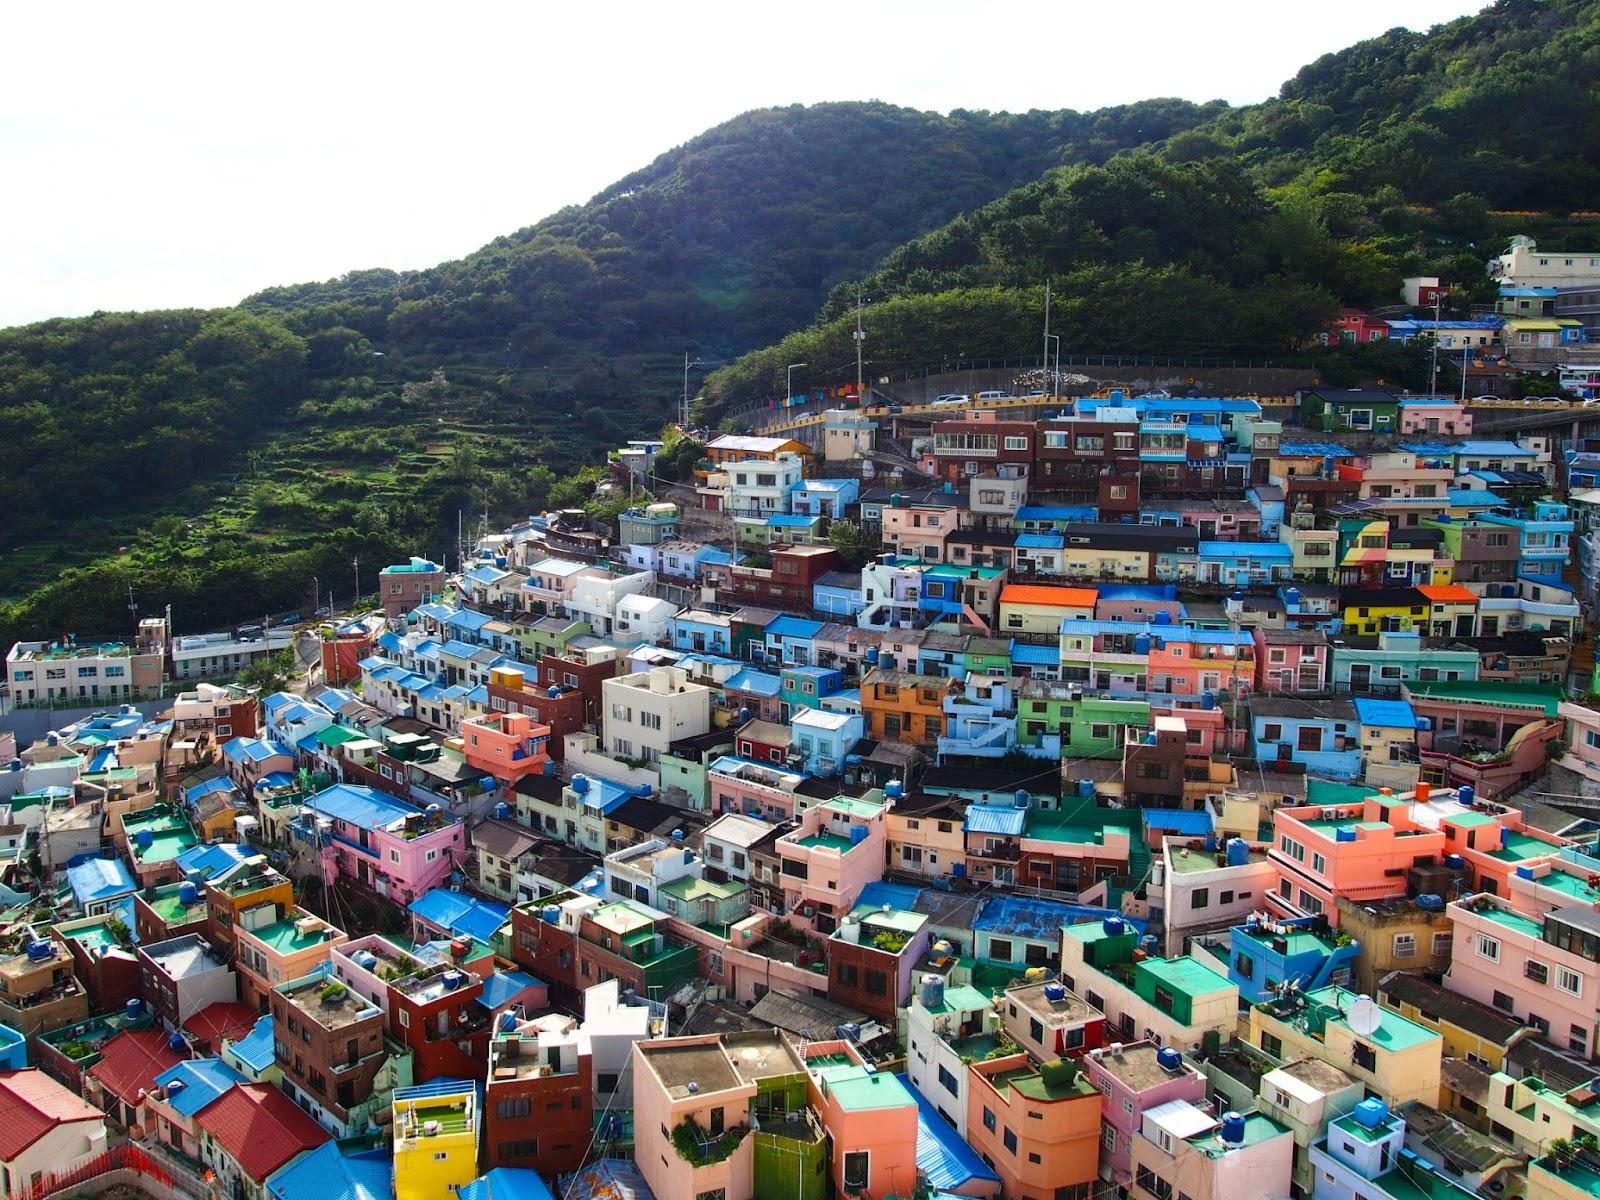 Busan Gamcheon Culture Village, the most colorful place in Busan, South Korea